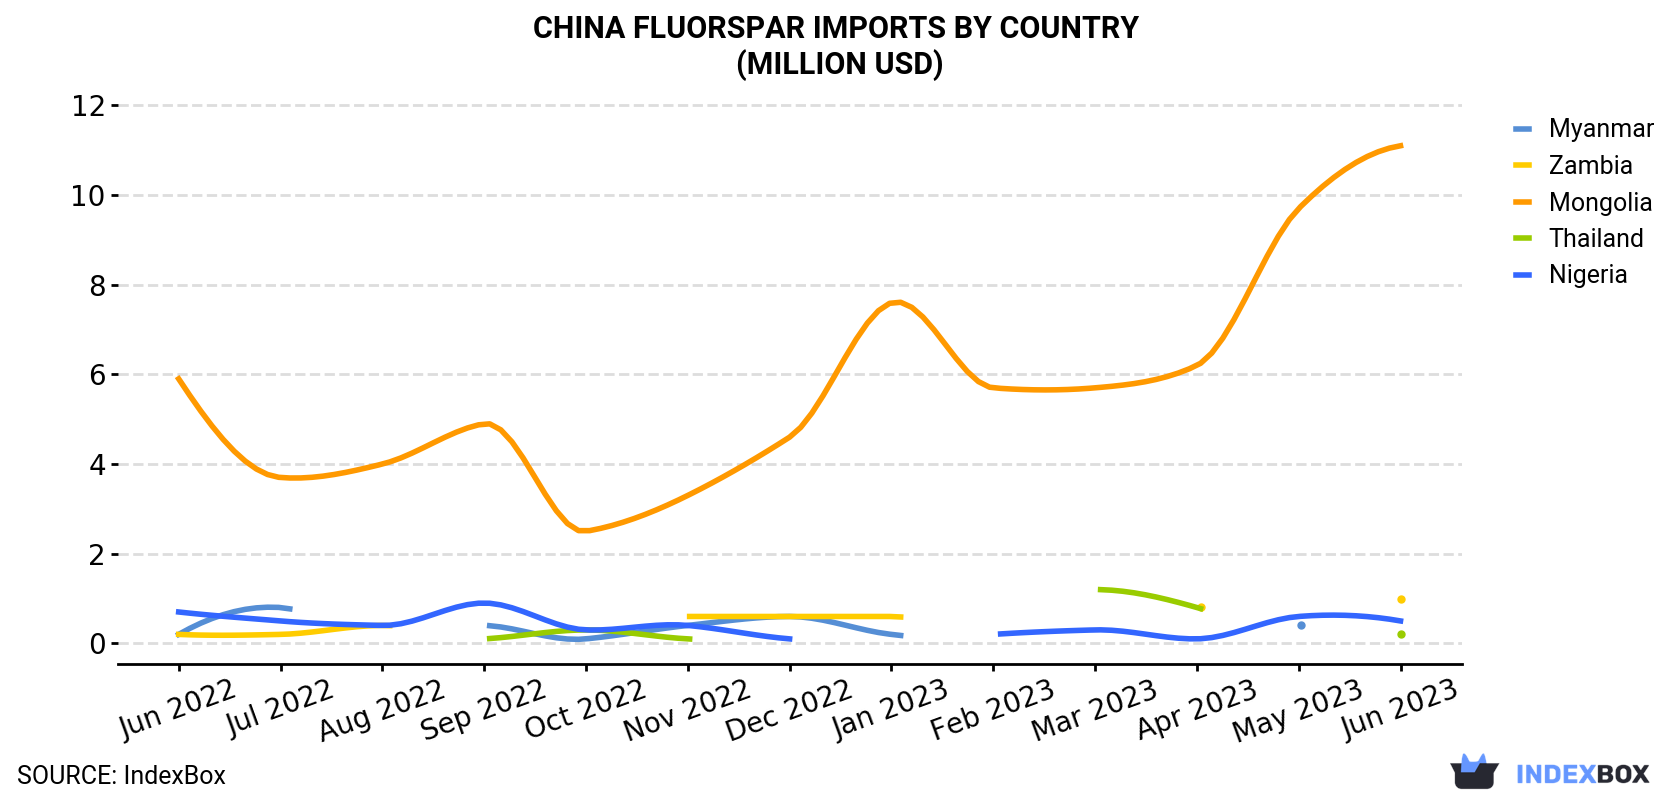 China Fluorspar Imports By Country (Million USD)